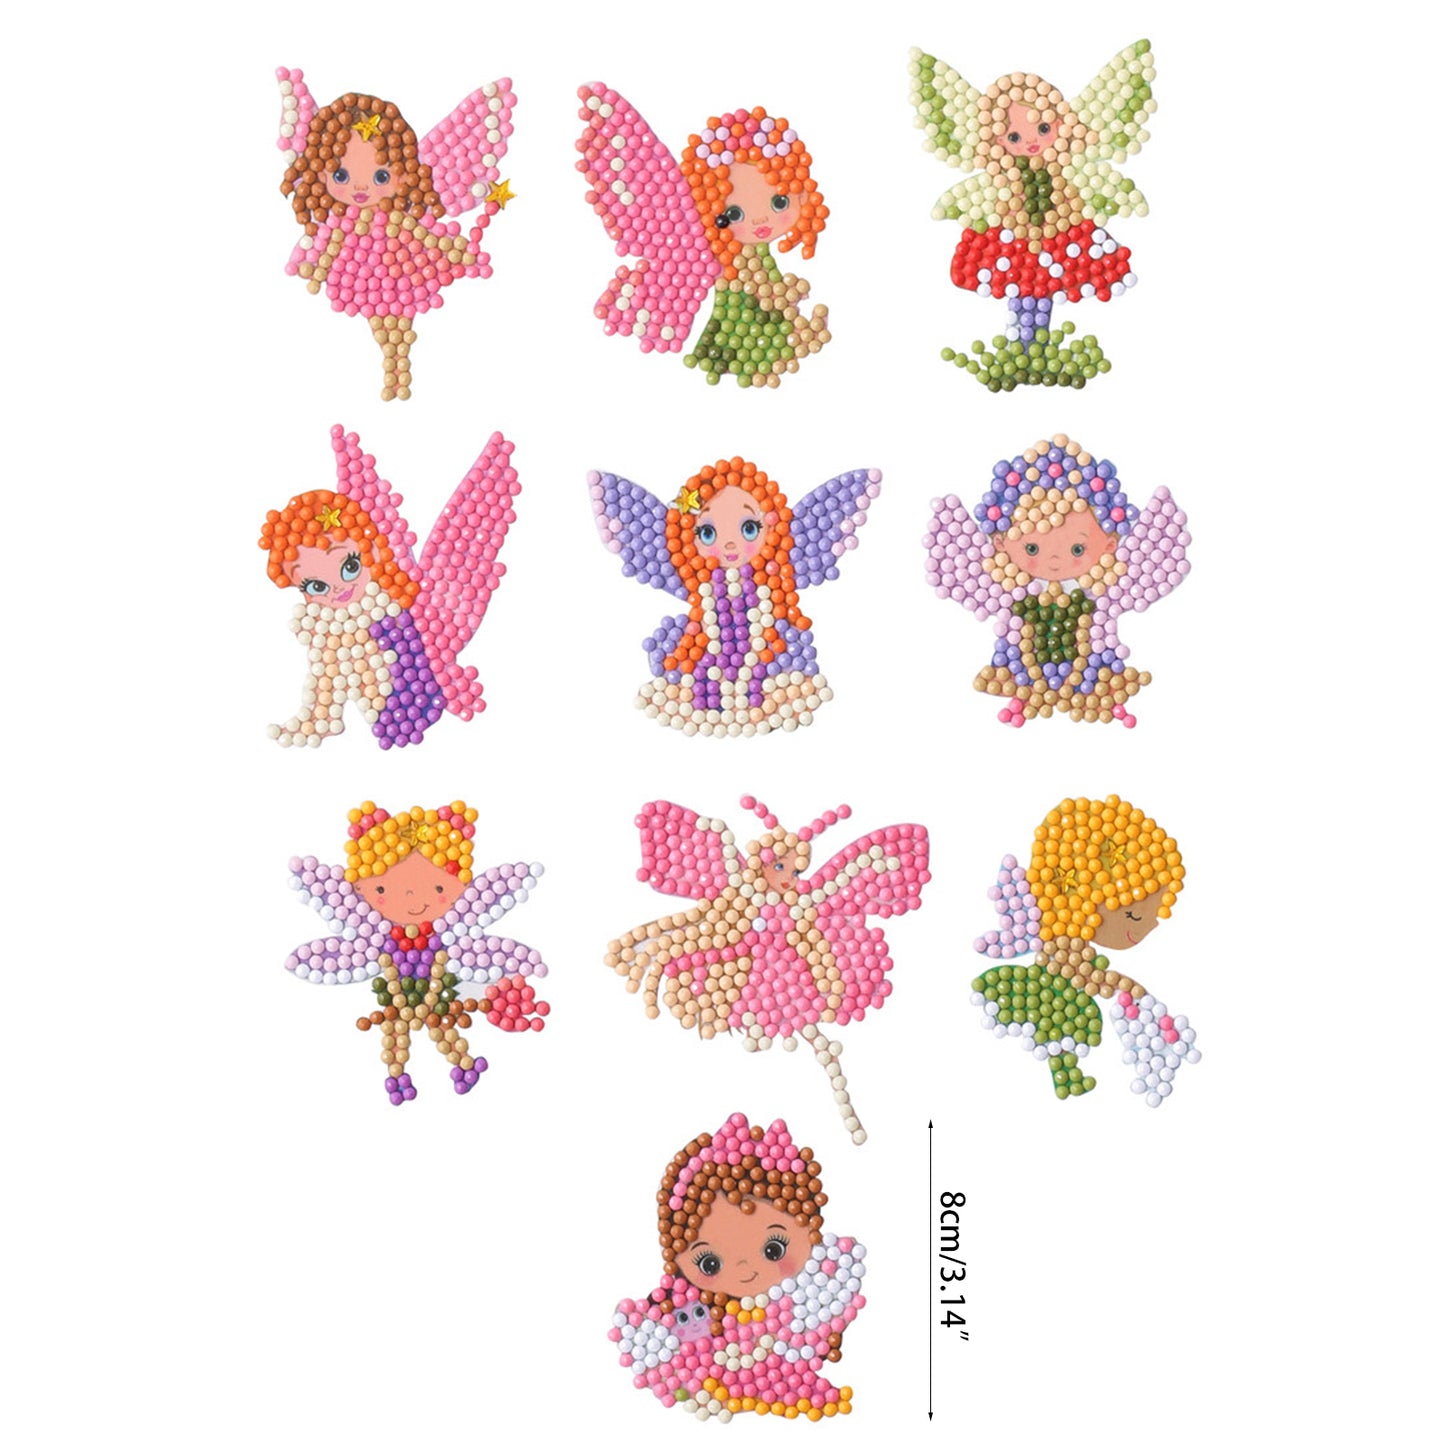 5D Diamond Painting Kit Different Styles Cute Baby Girls Diamond Stickers Paint by Numbers Art Craft For Kids Gift